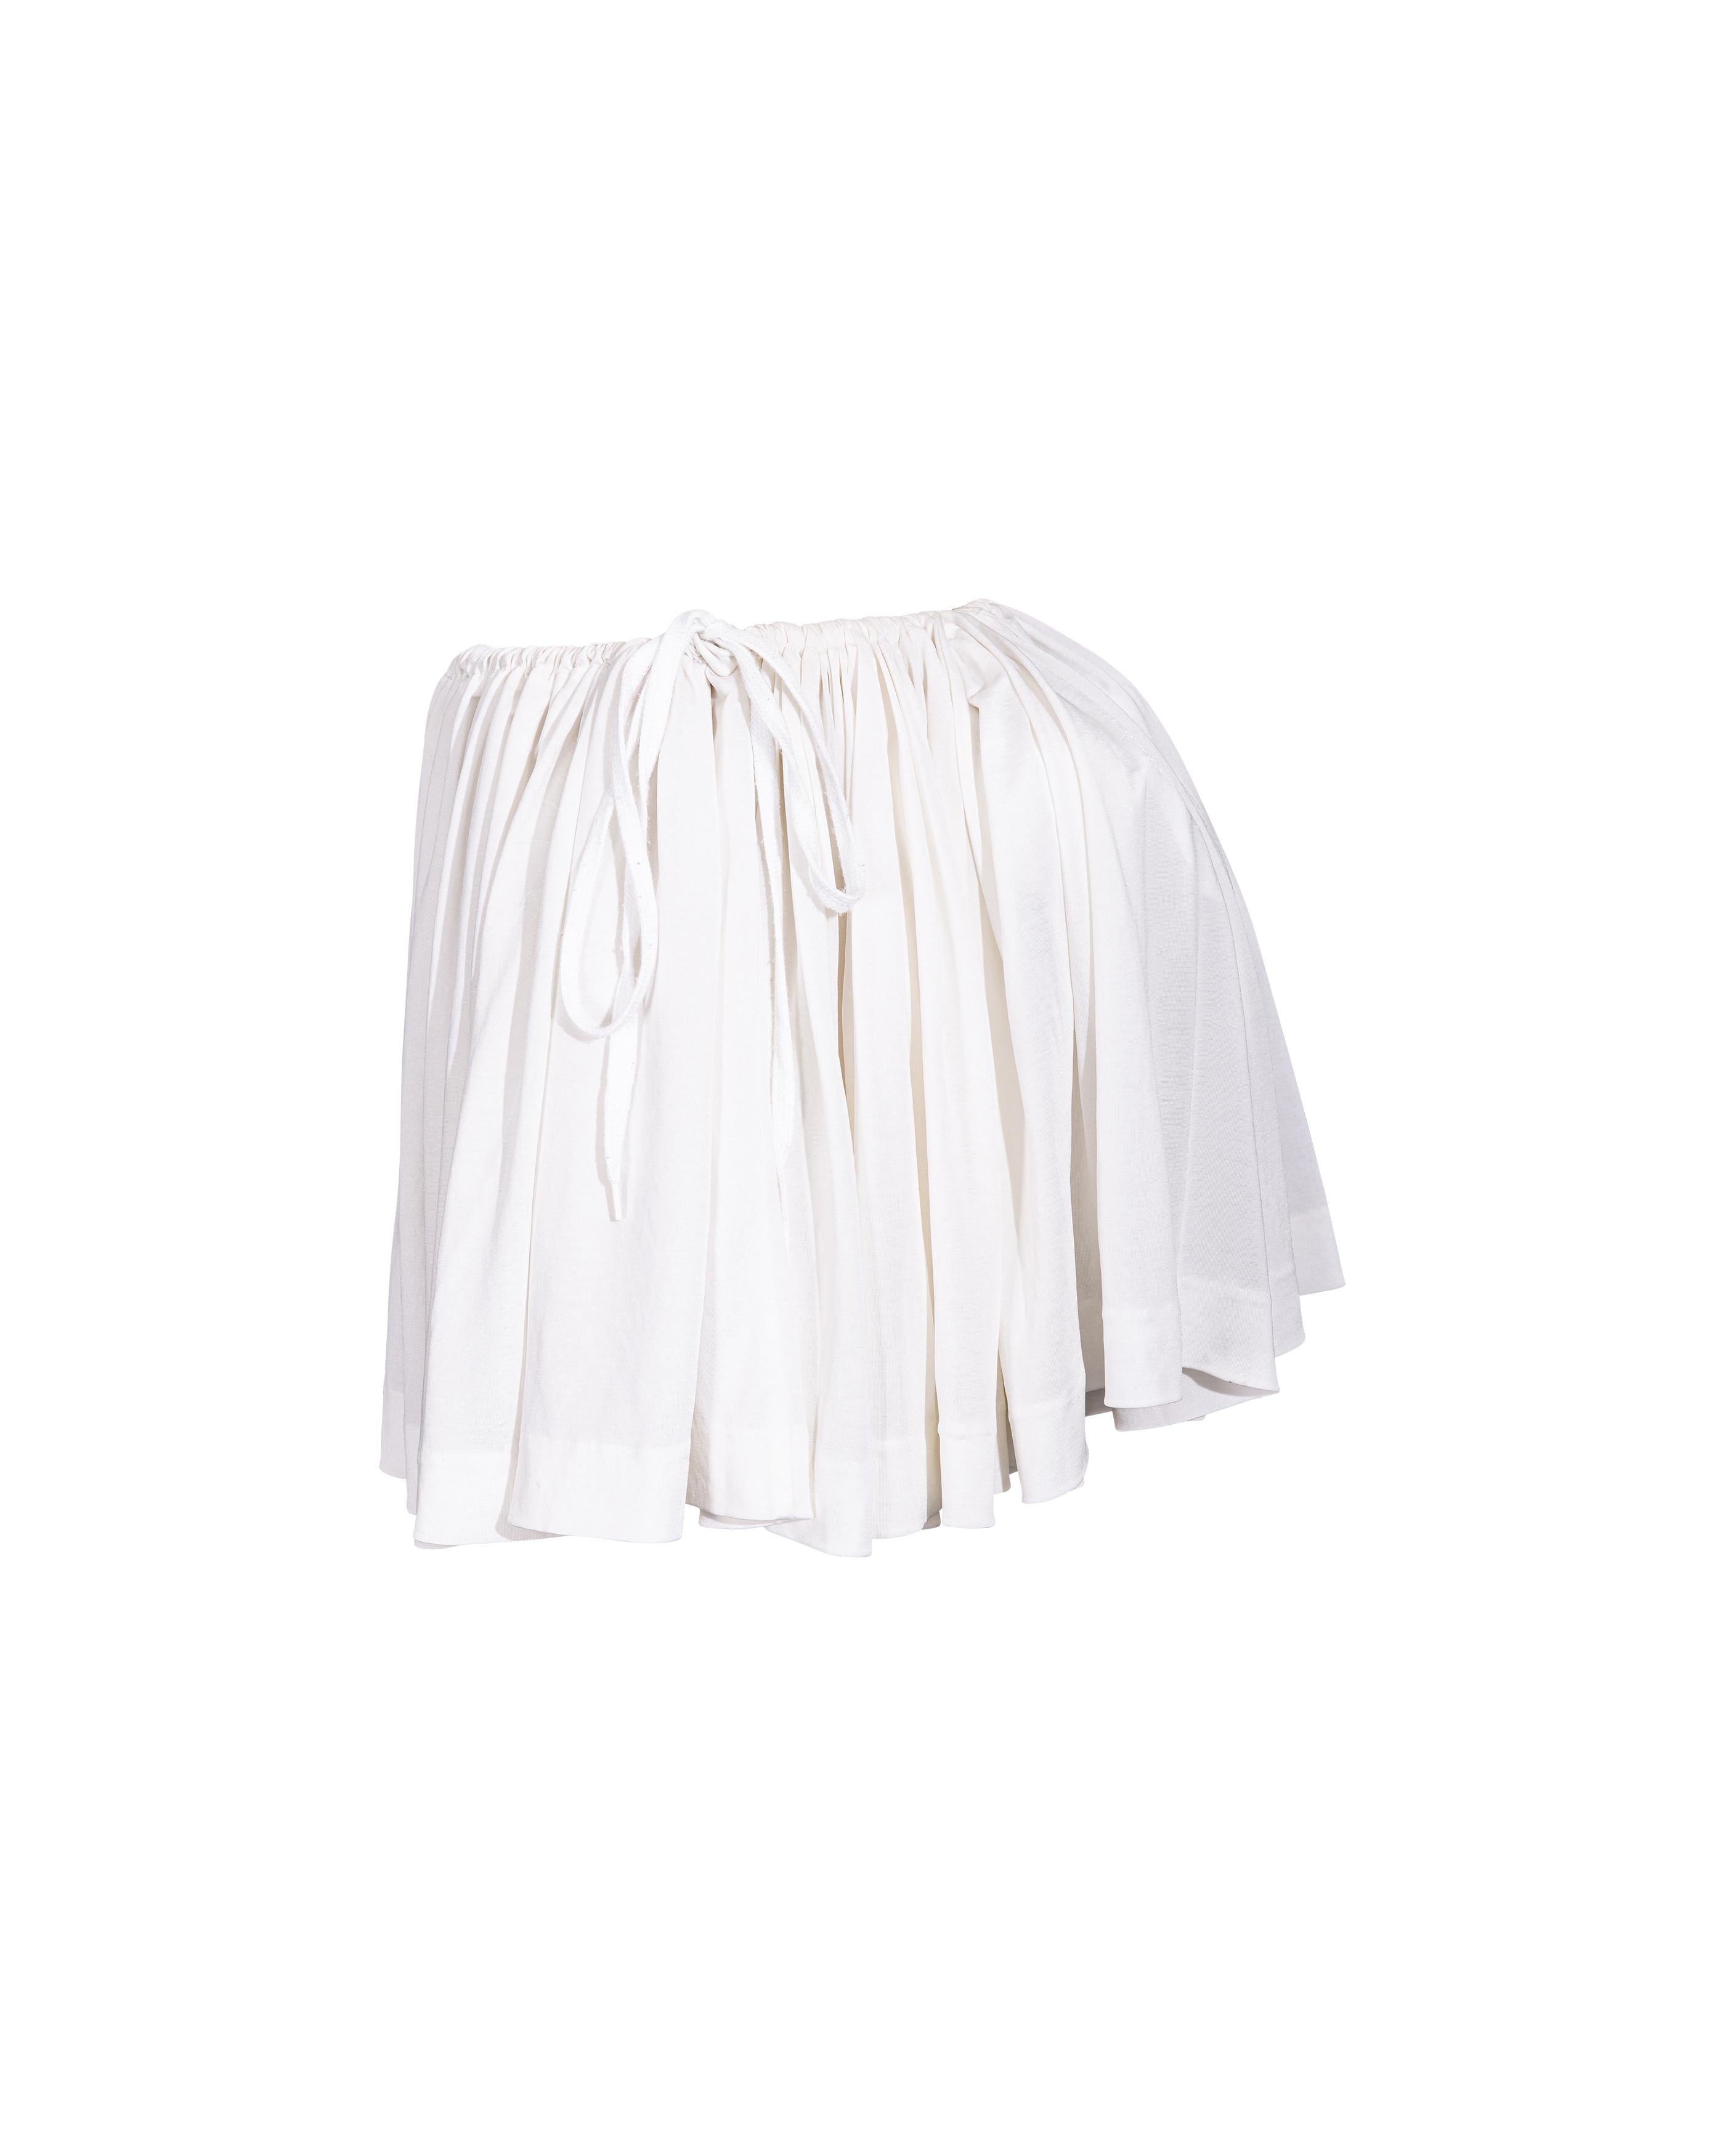 Women's S/S 1988 Vivienne Westwood White Mini Skirt with Removable Bustle For Sale